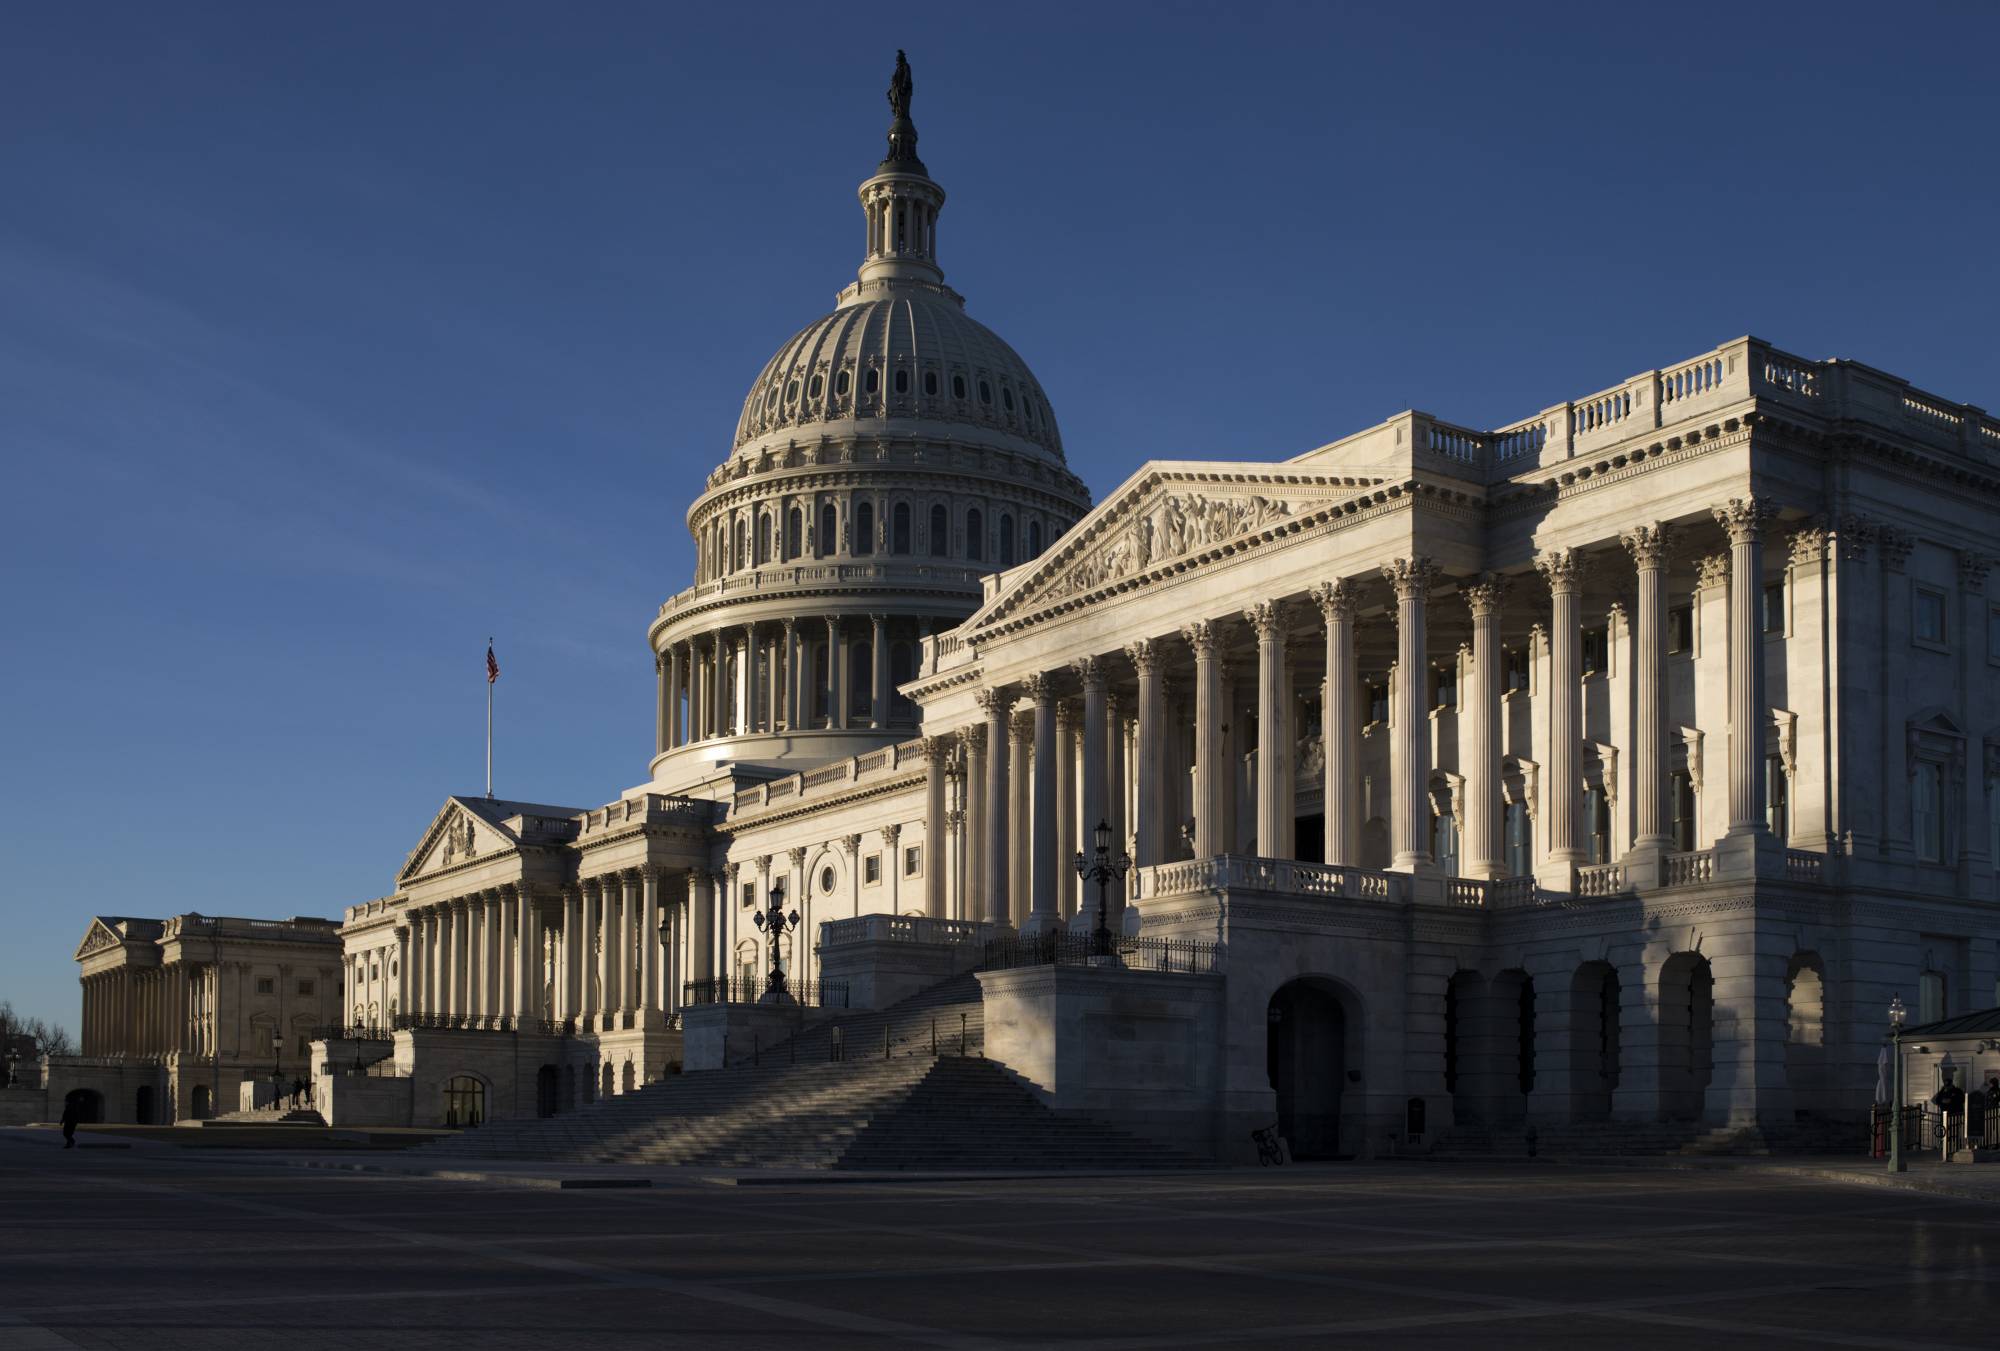 The Capitol is seen on the first day of a government shutdown after a divided Senate rejected a funding measure, in Washington, Saturday, Jan. 20, 2018. (AP Photo/J. Scott Applewhite)